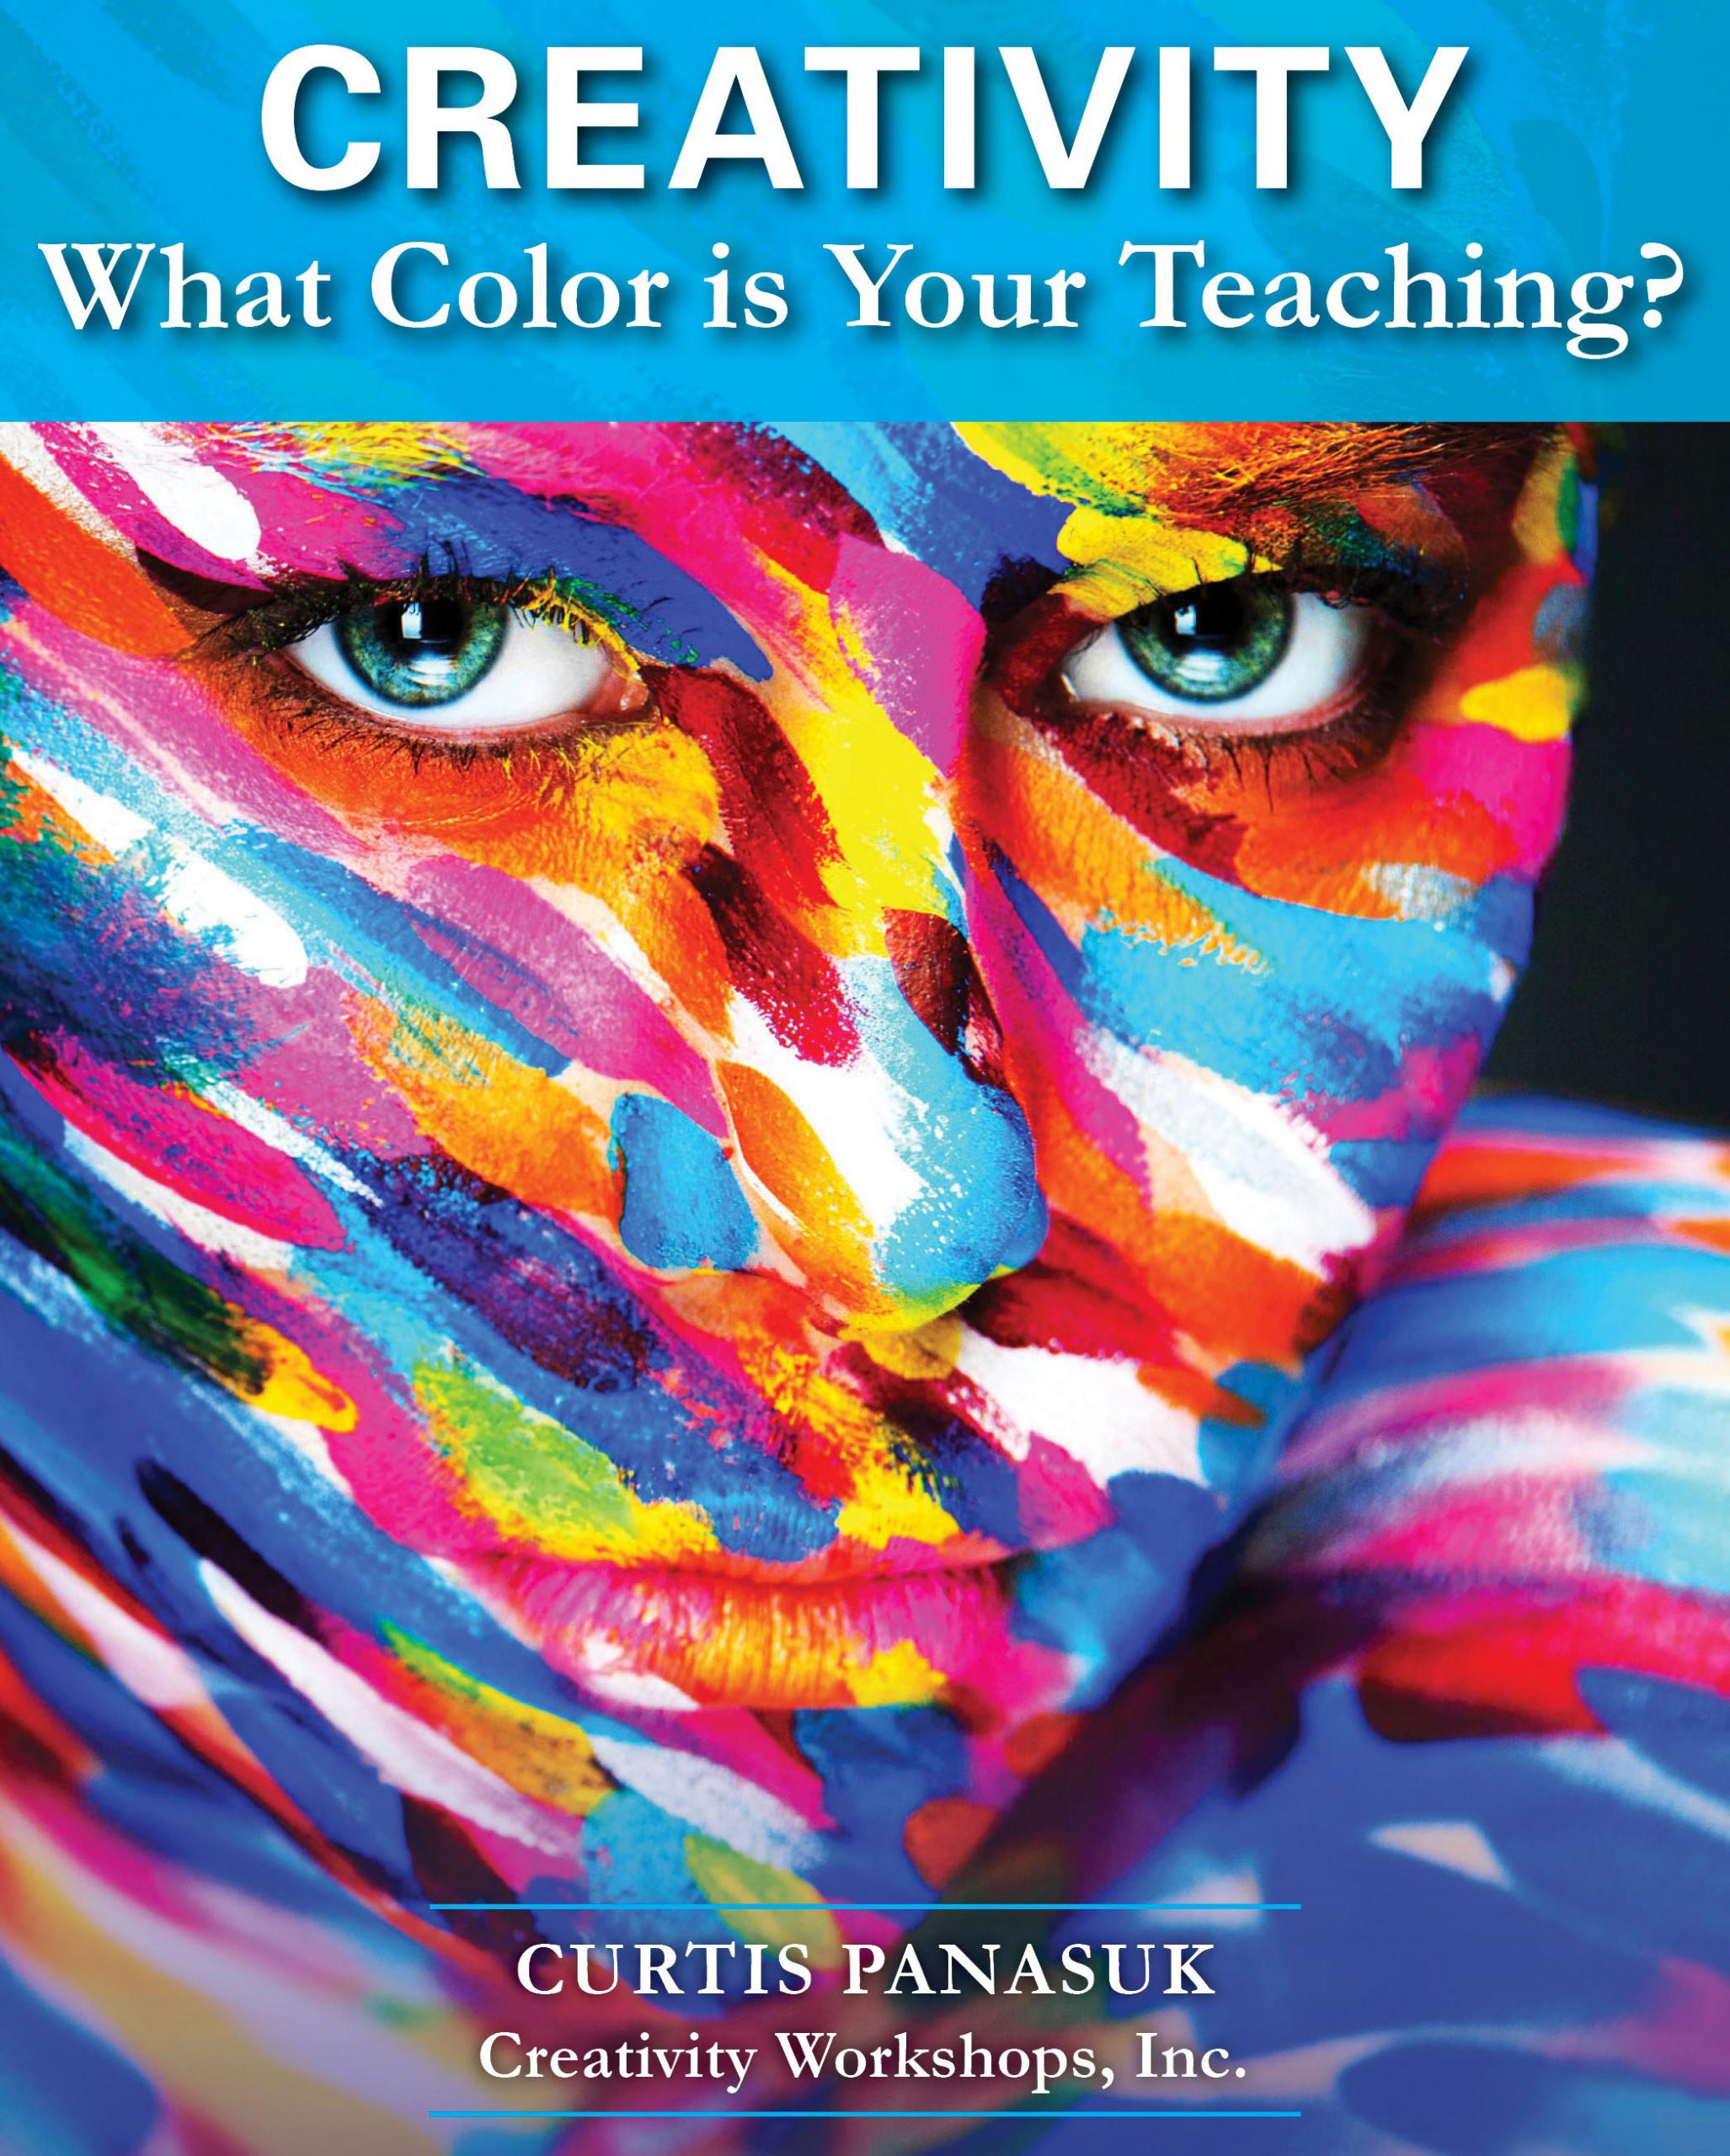 Creativity: What Color is Your Teaching?